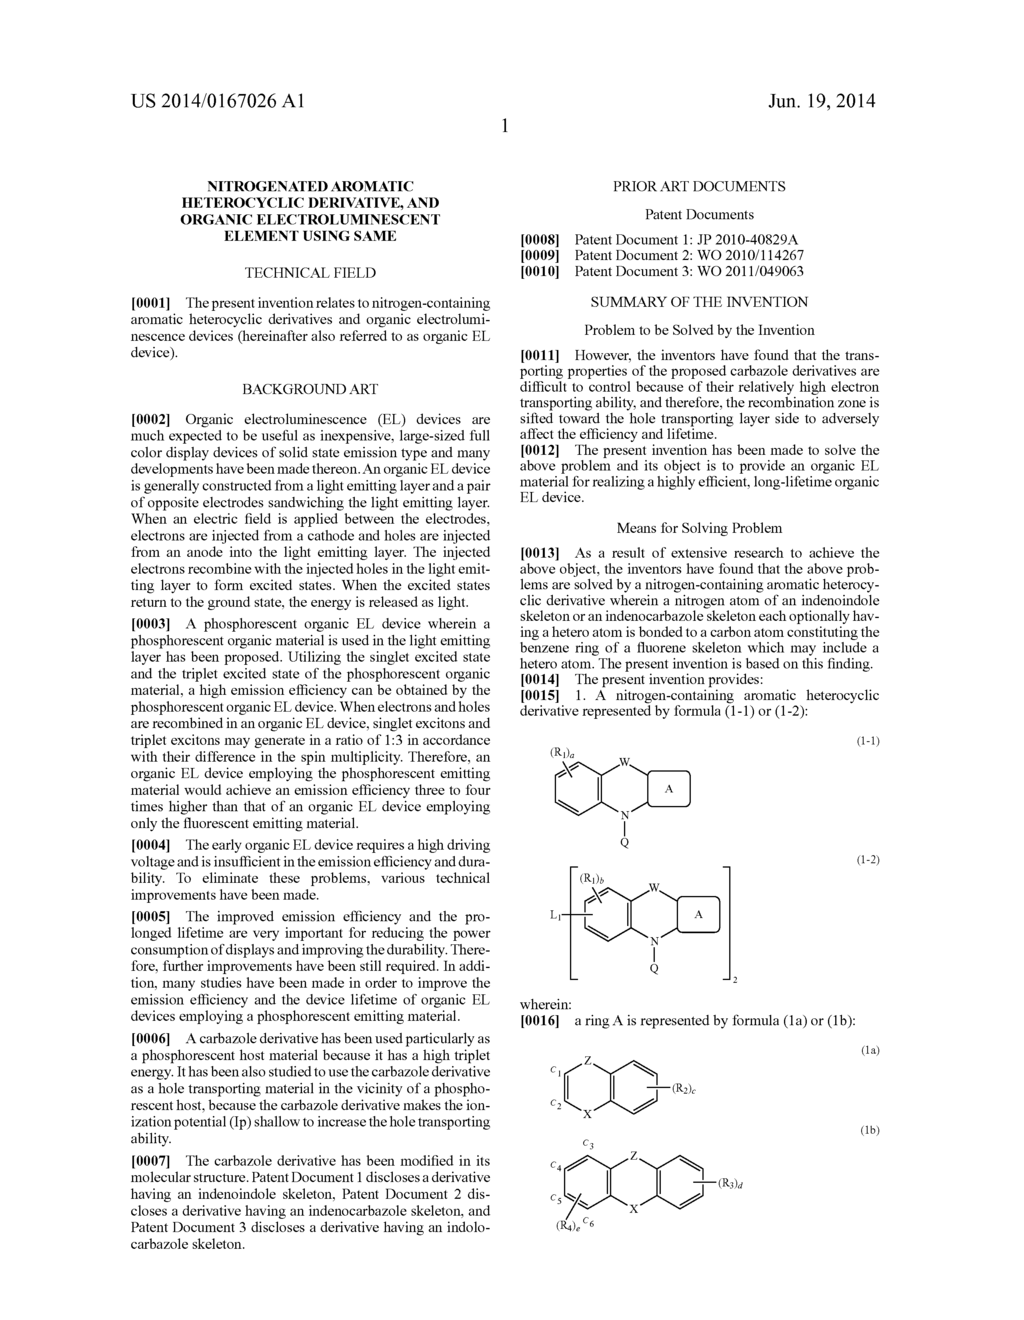 NITROGENATED AROMATIC HETEROCYCLIC DERIVATIVE, AND ORGANIC     ELECTROLUMINESCENT ELEMENT USING SAME - diagram, schematic, and image 03